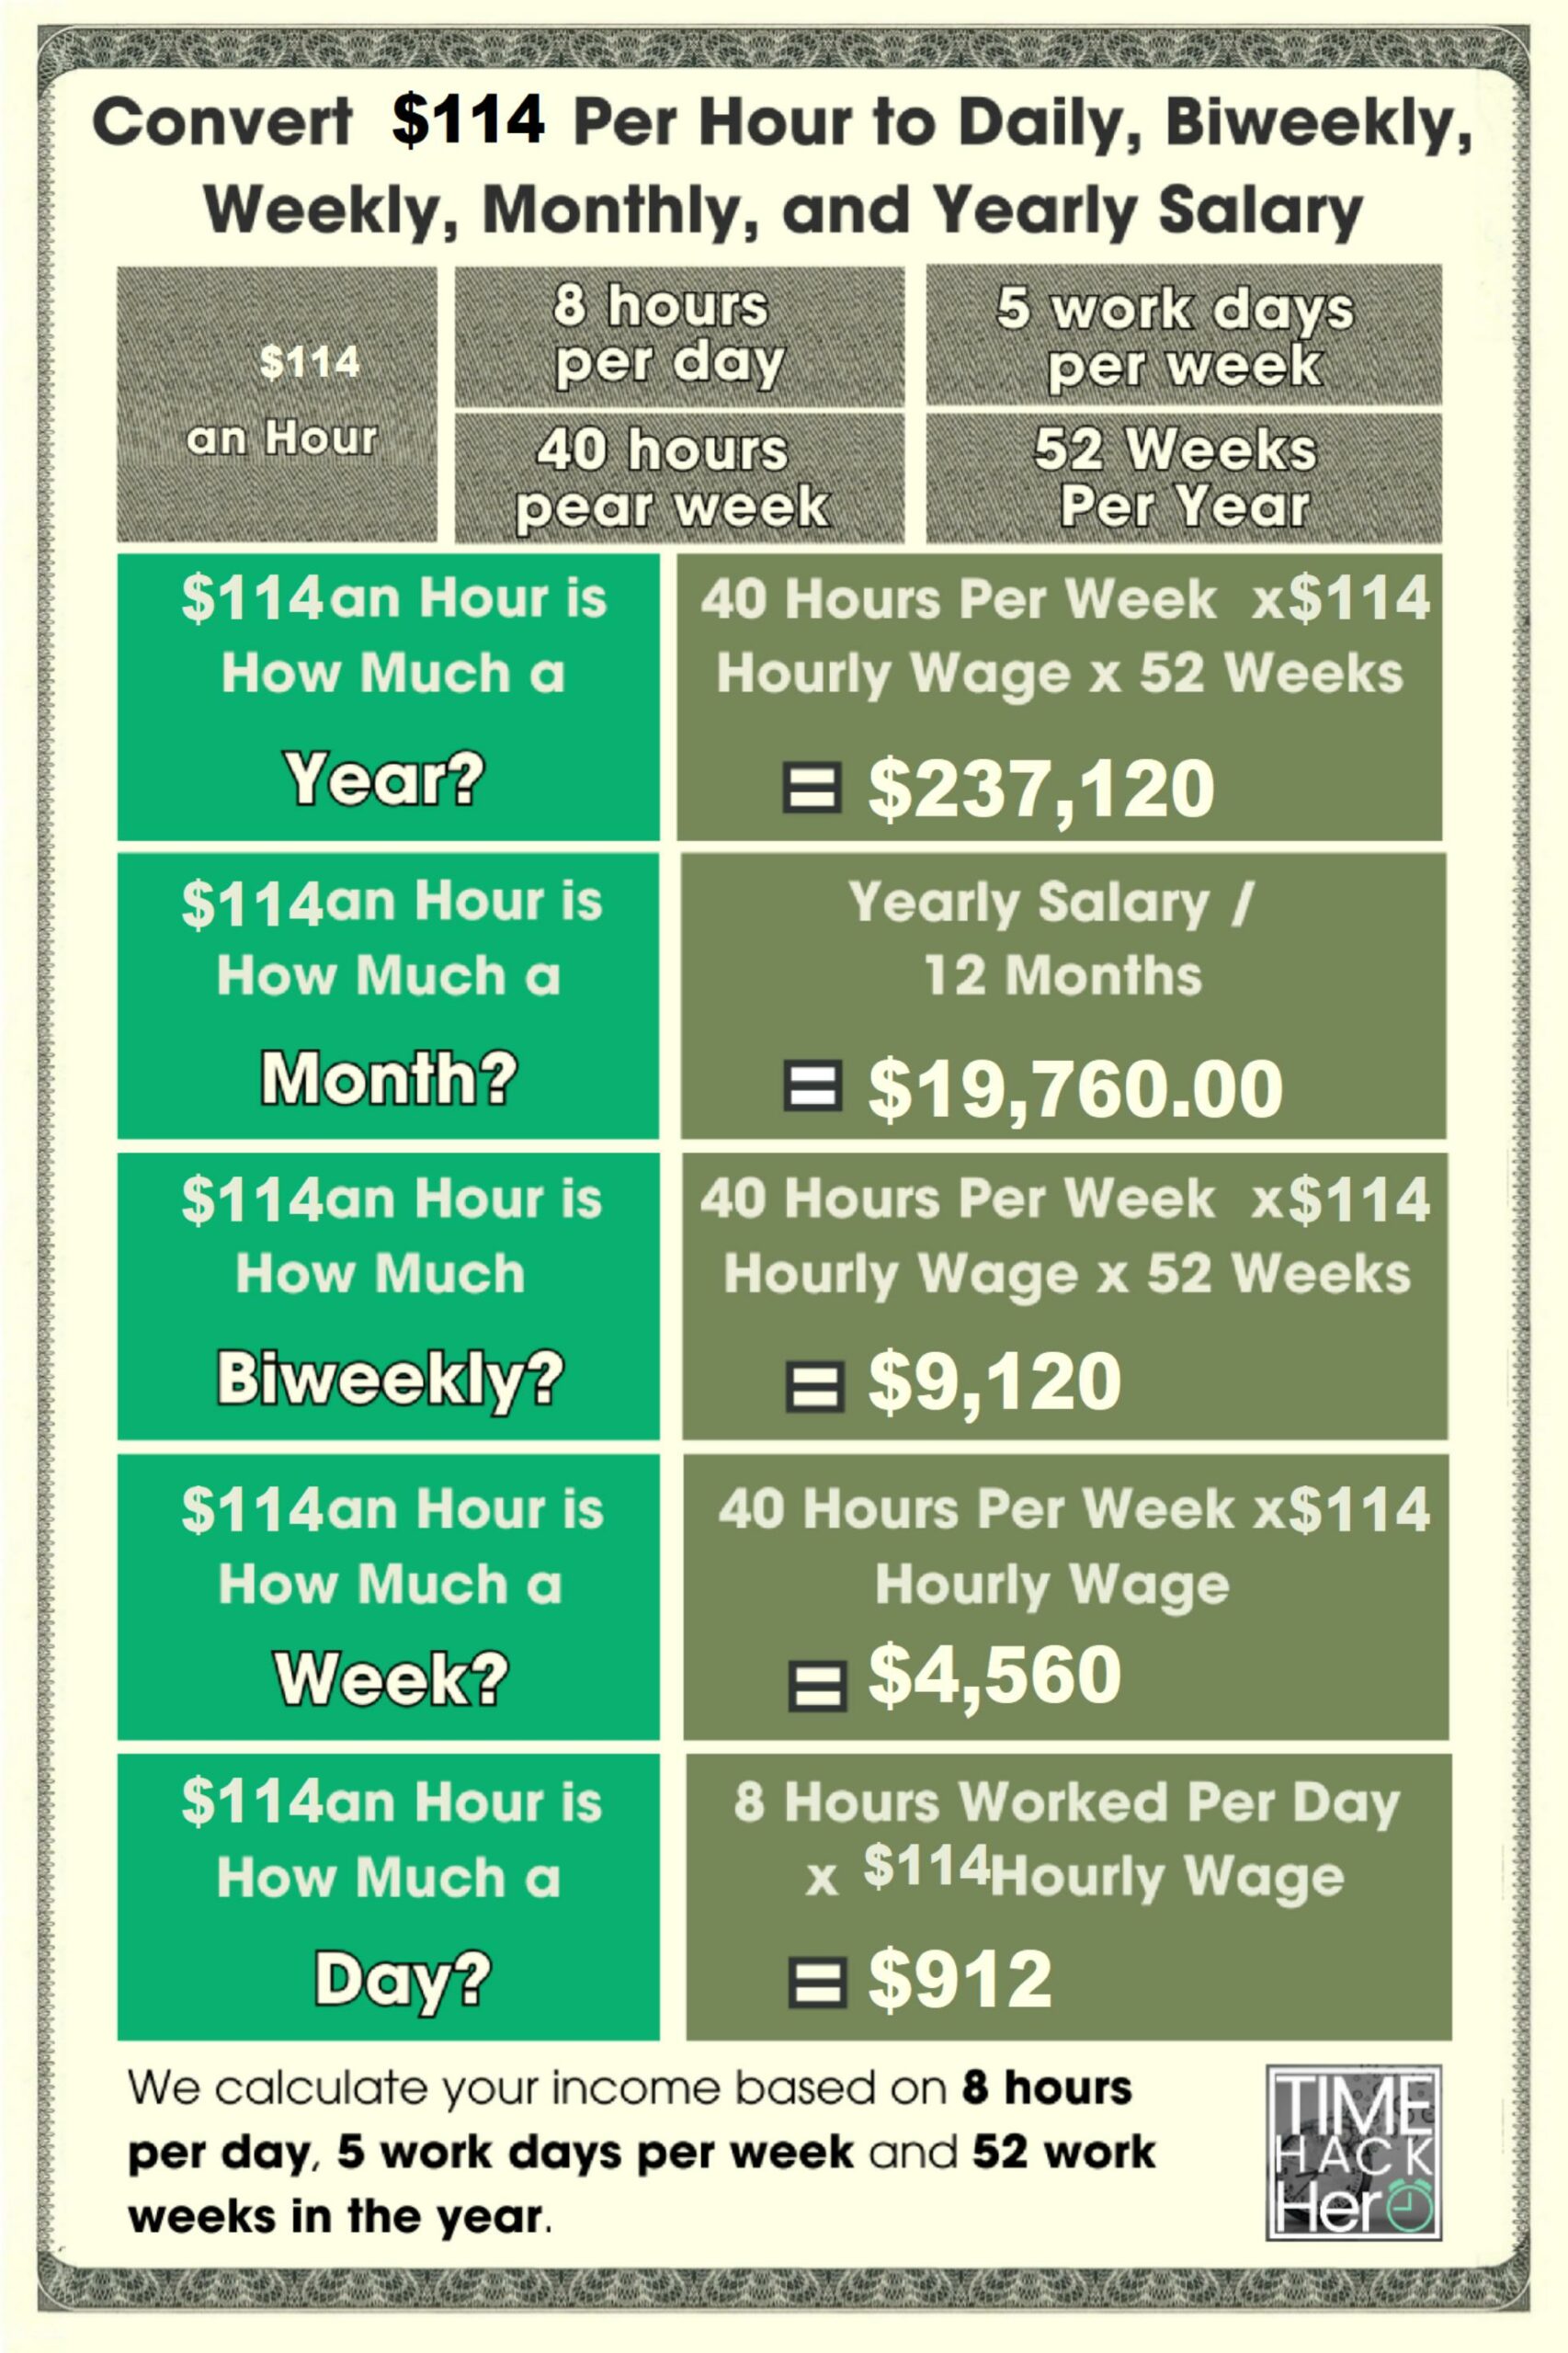 Convert $114 Per Hour to Weekly, Monthly, and Yearly Salary